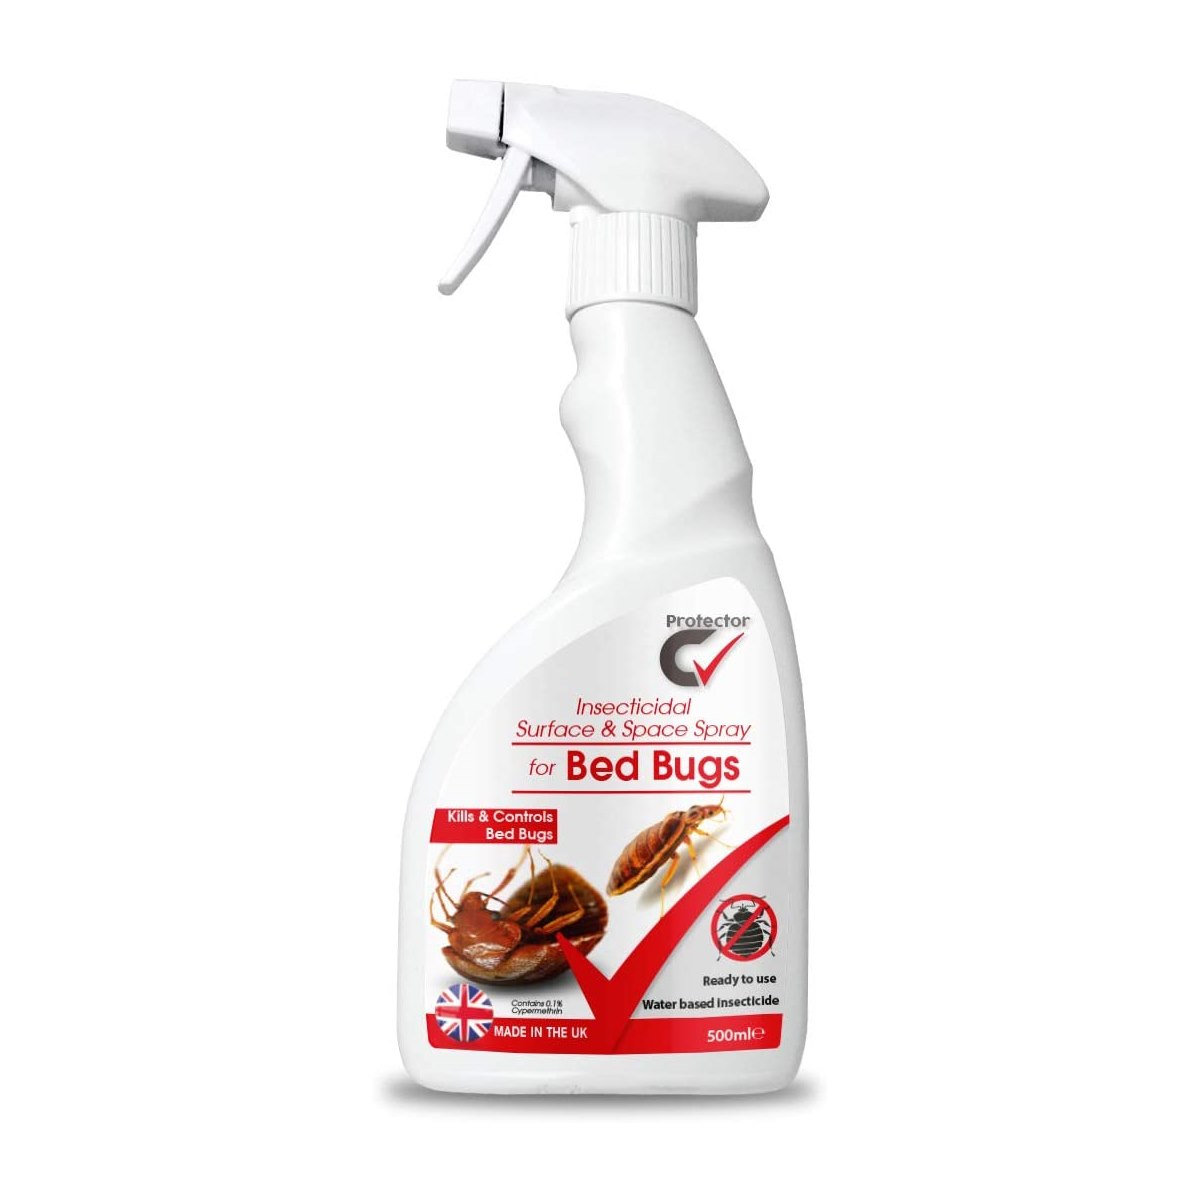 Protector C Insecticidal Spray For Bed Bugs 500ml